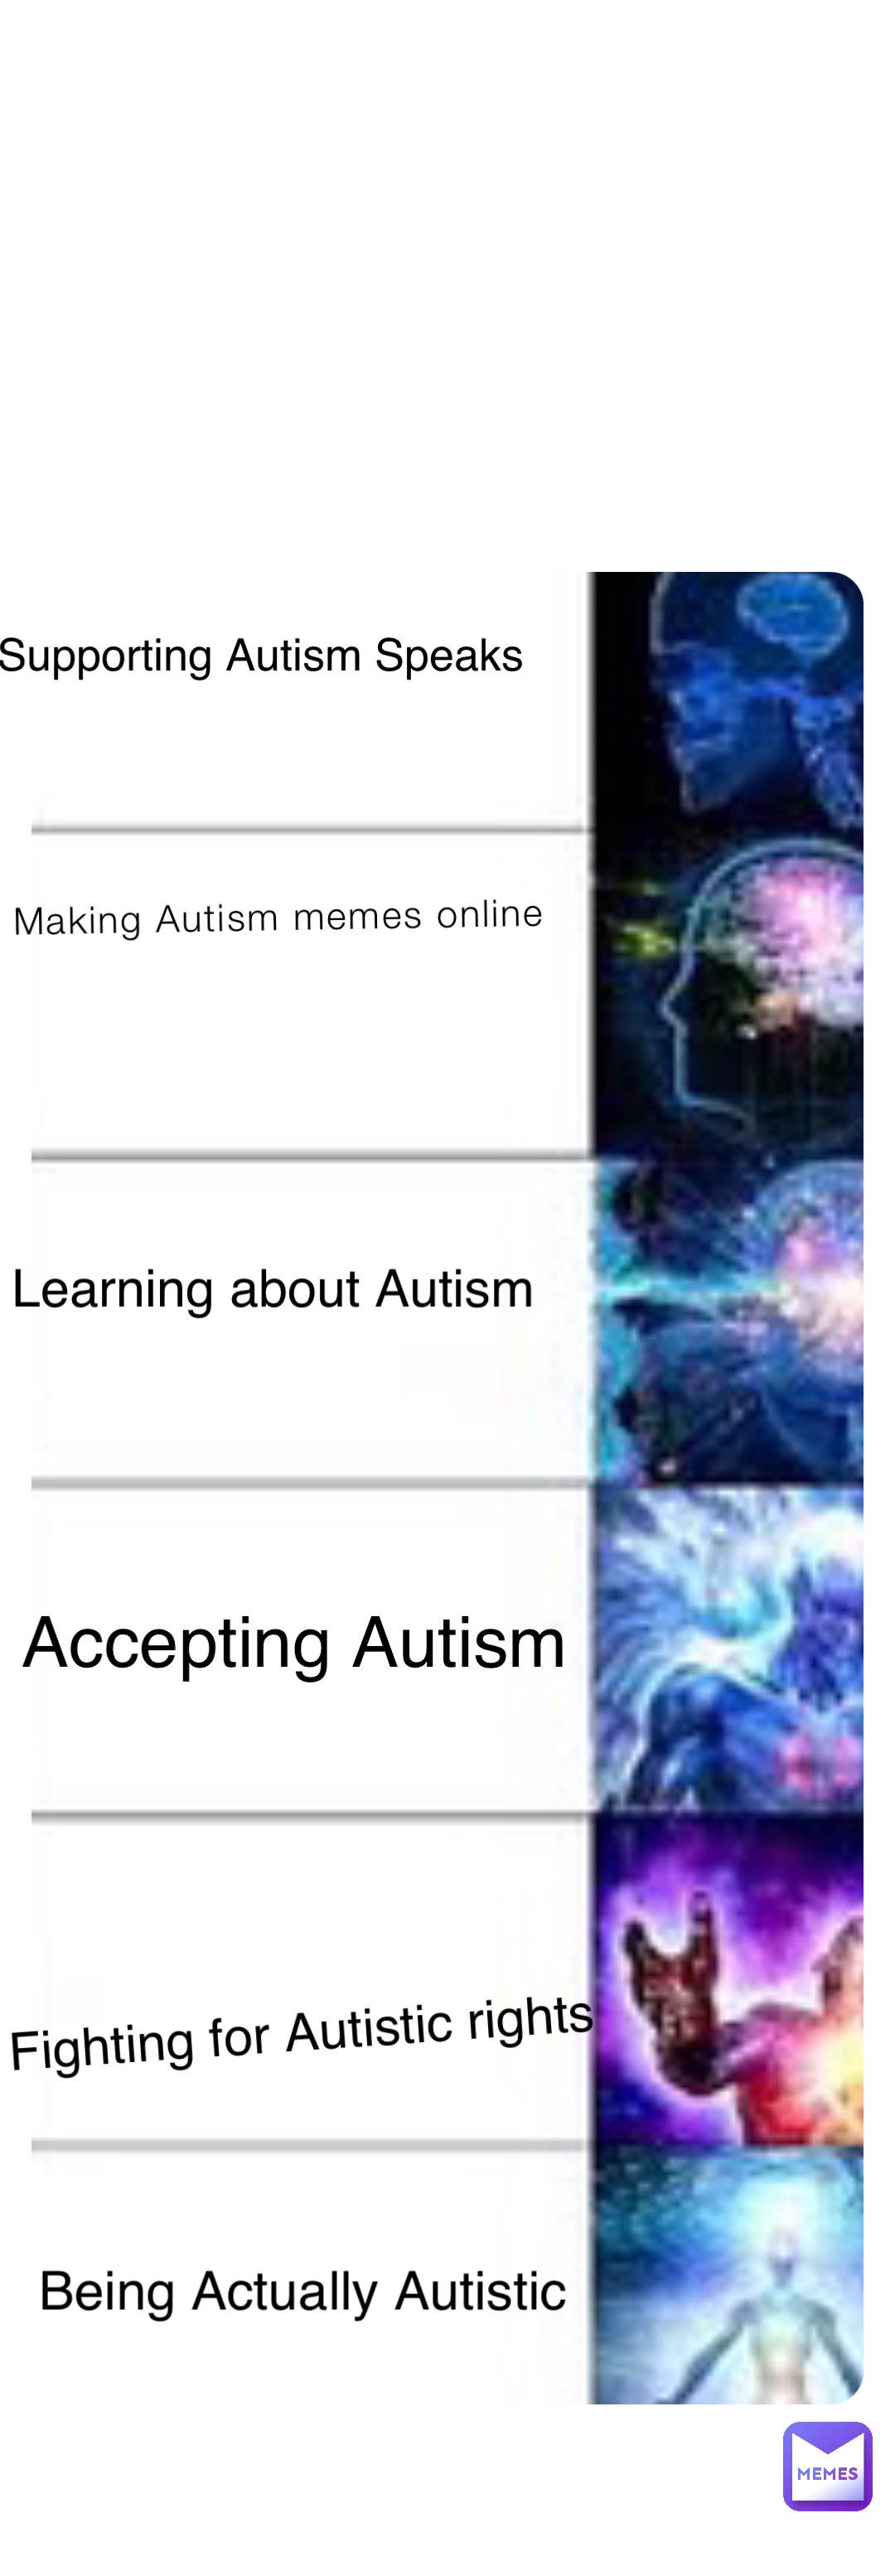 Making Autism memes online Supporting Autism Speaks Learning about Autism Accepting Autism Fighting for Autistic rights Being Actually Autistic